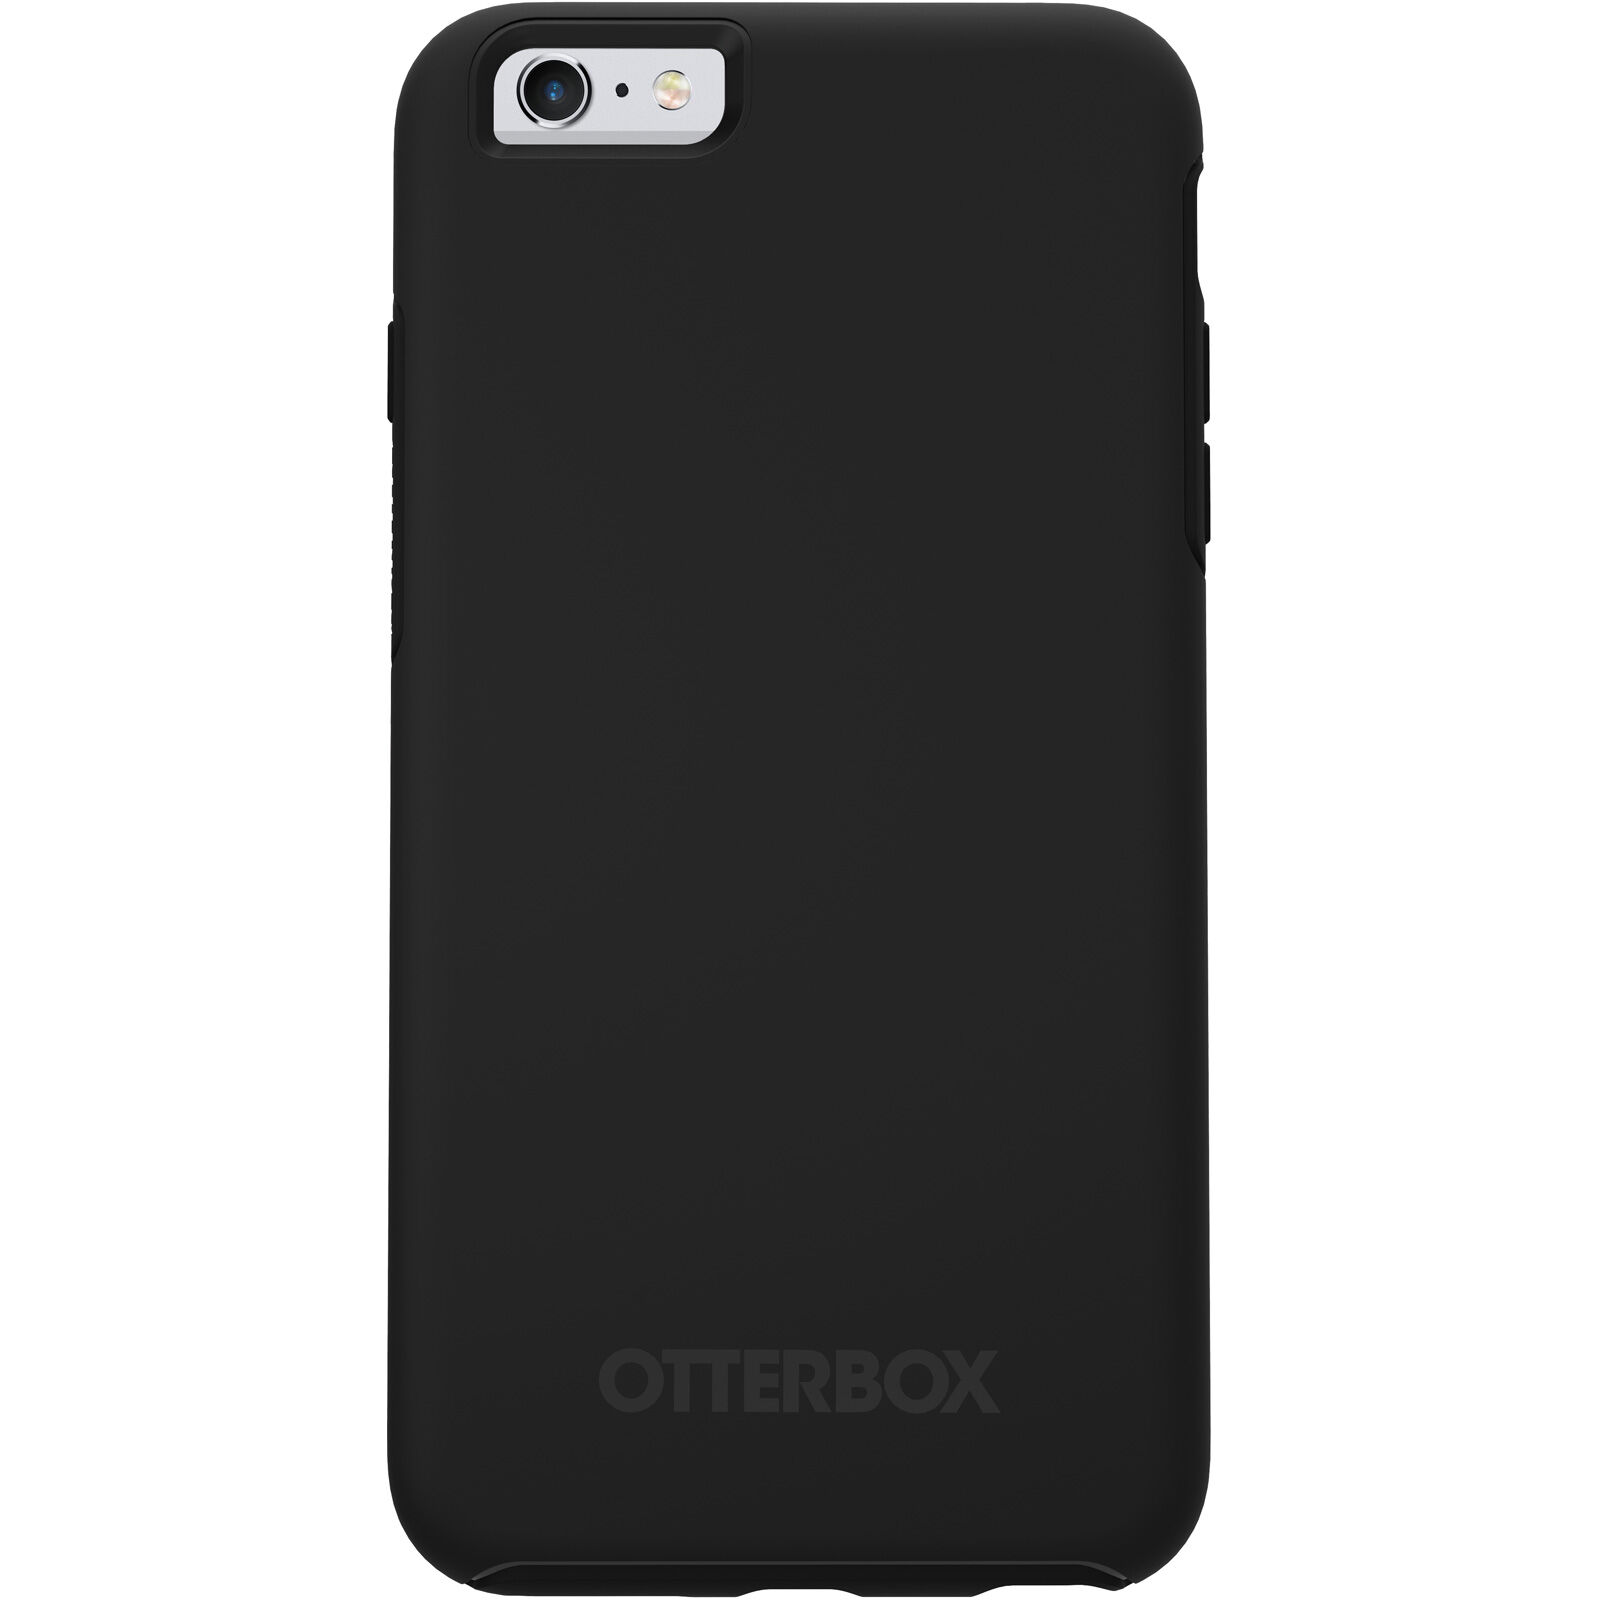 OtterBox Symmetry Series Case for iPhone 6/6s Black